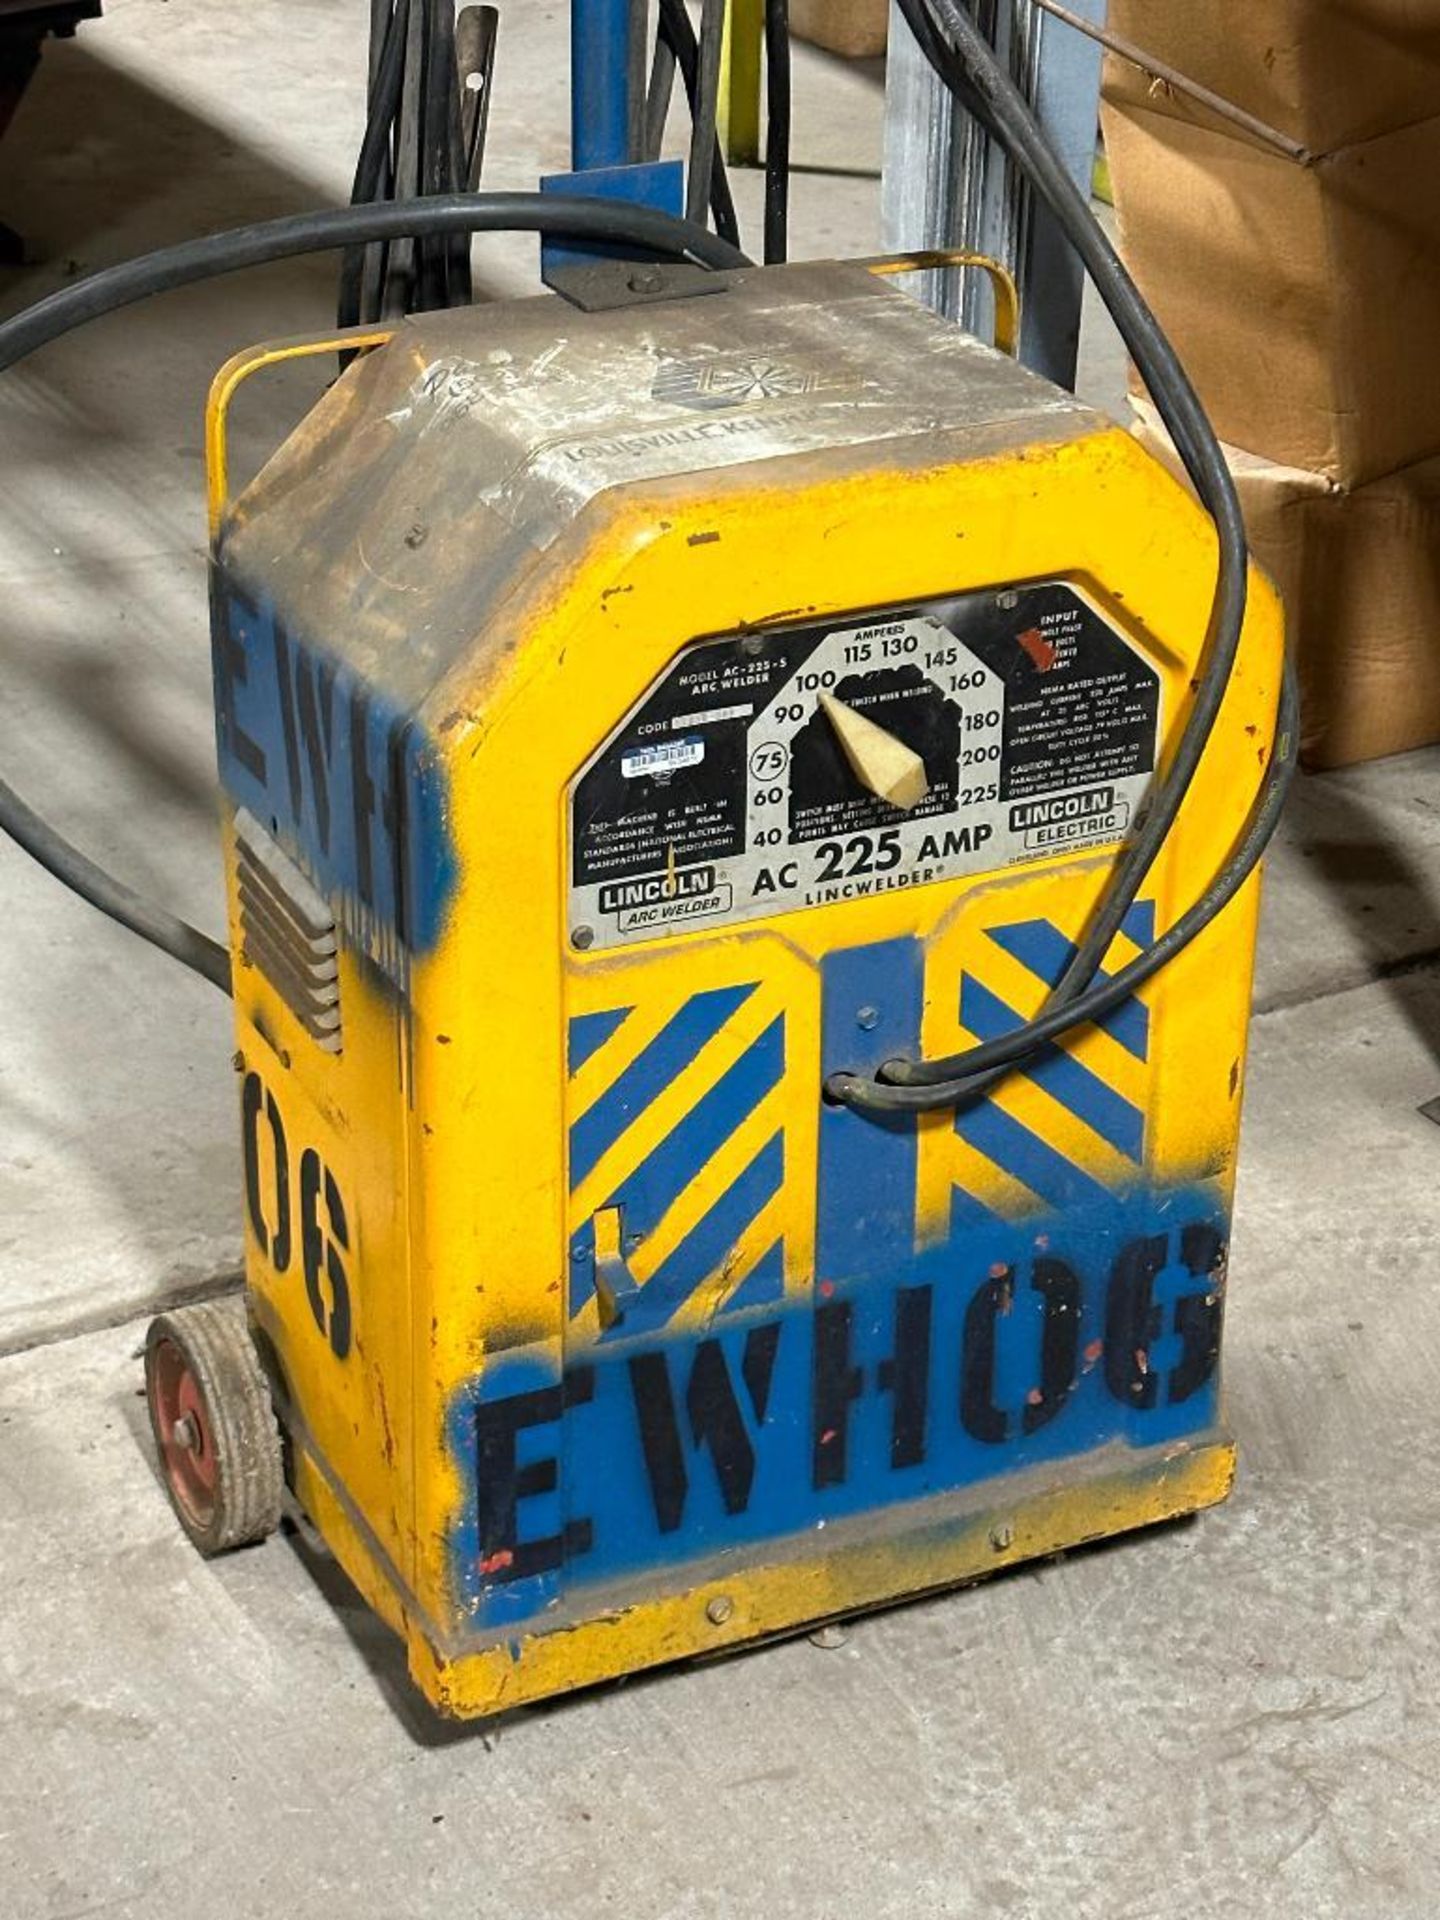 LINCOLN ELECTRIC 225 AMP ARC WELDER WITH DOLLY CART - Image 2 of 3